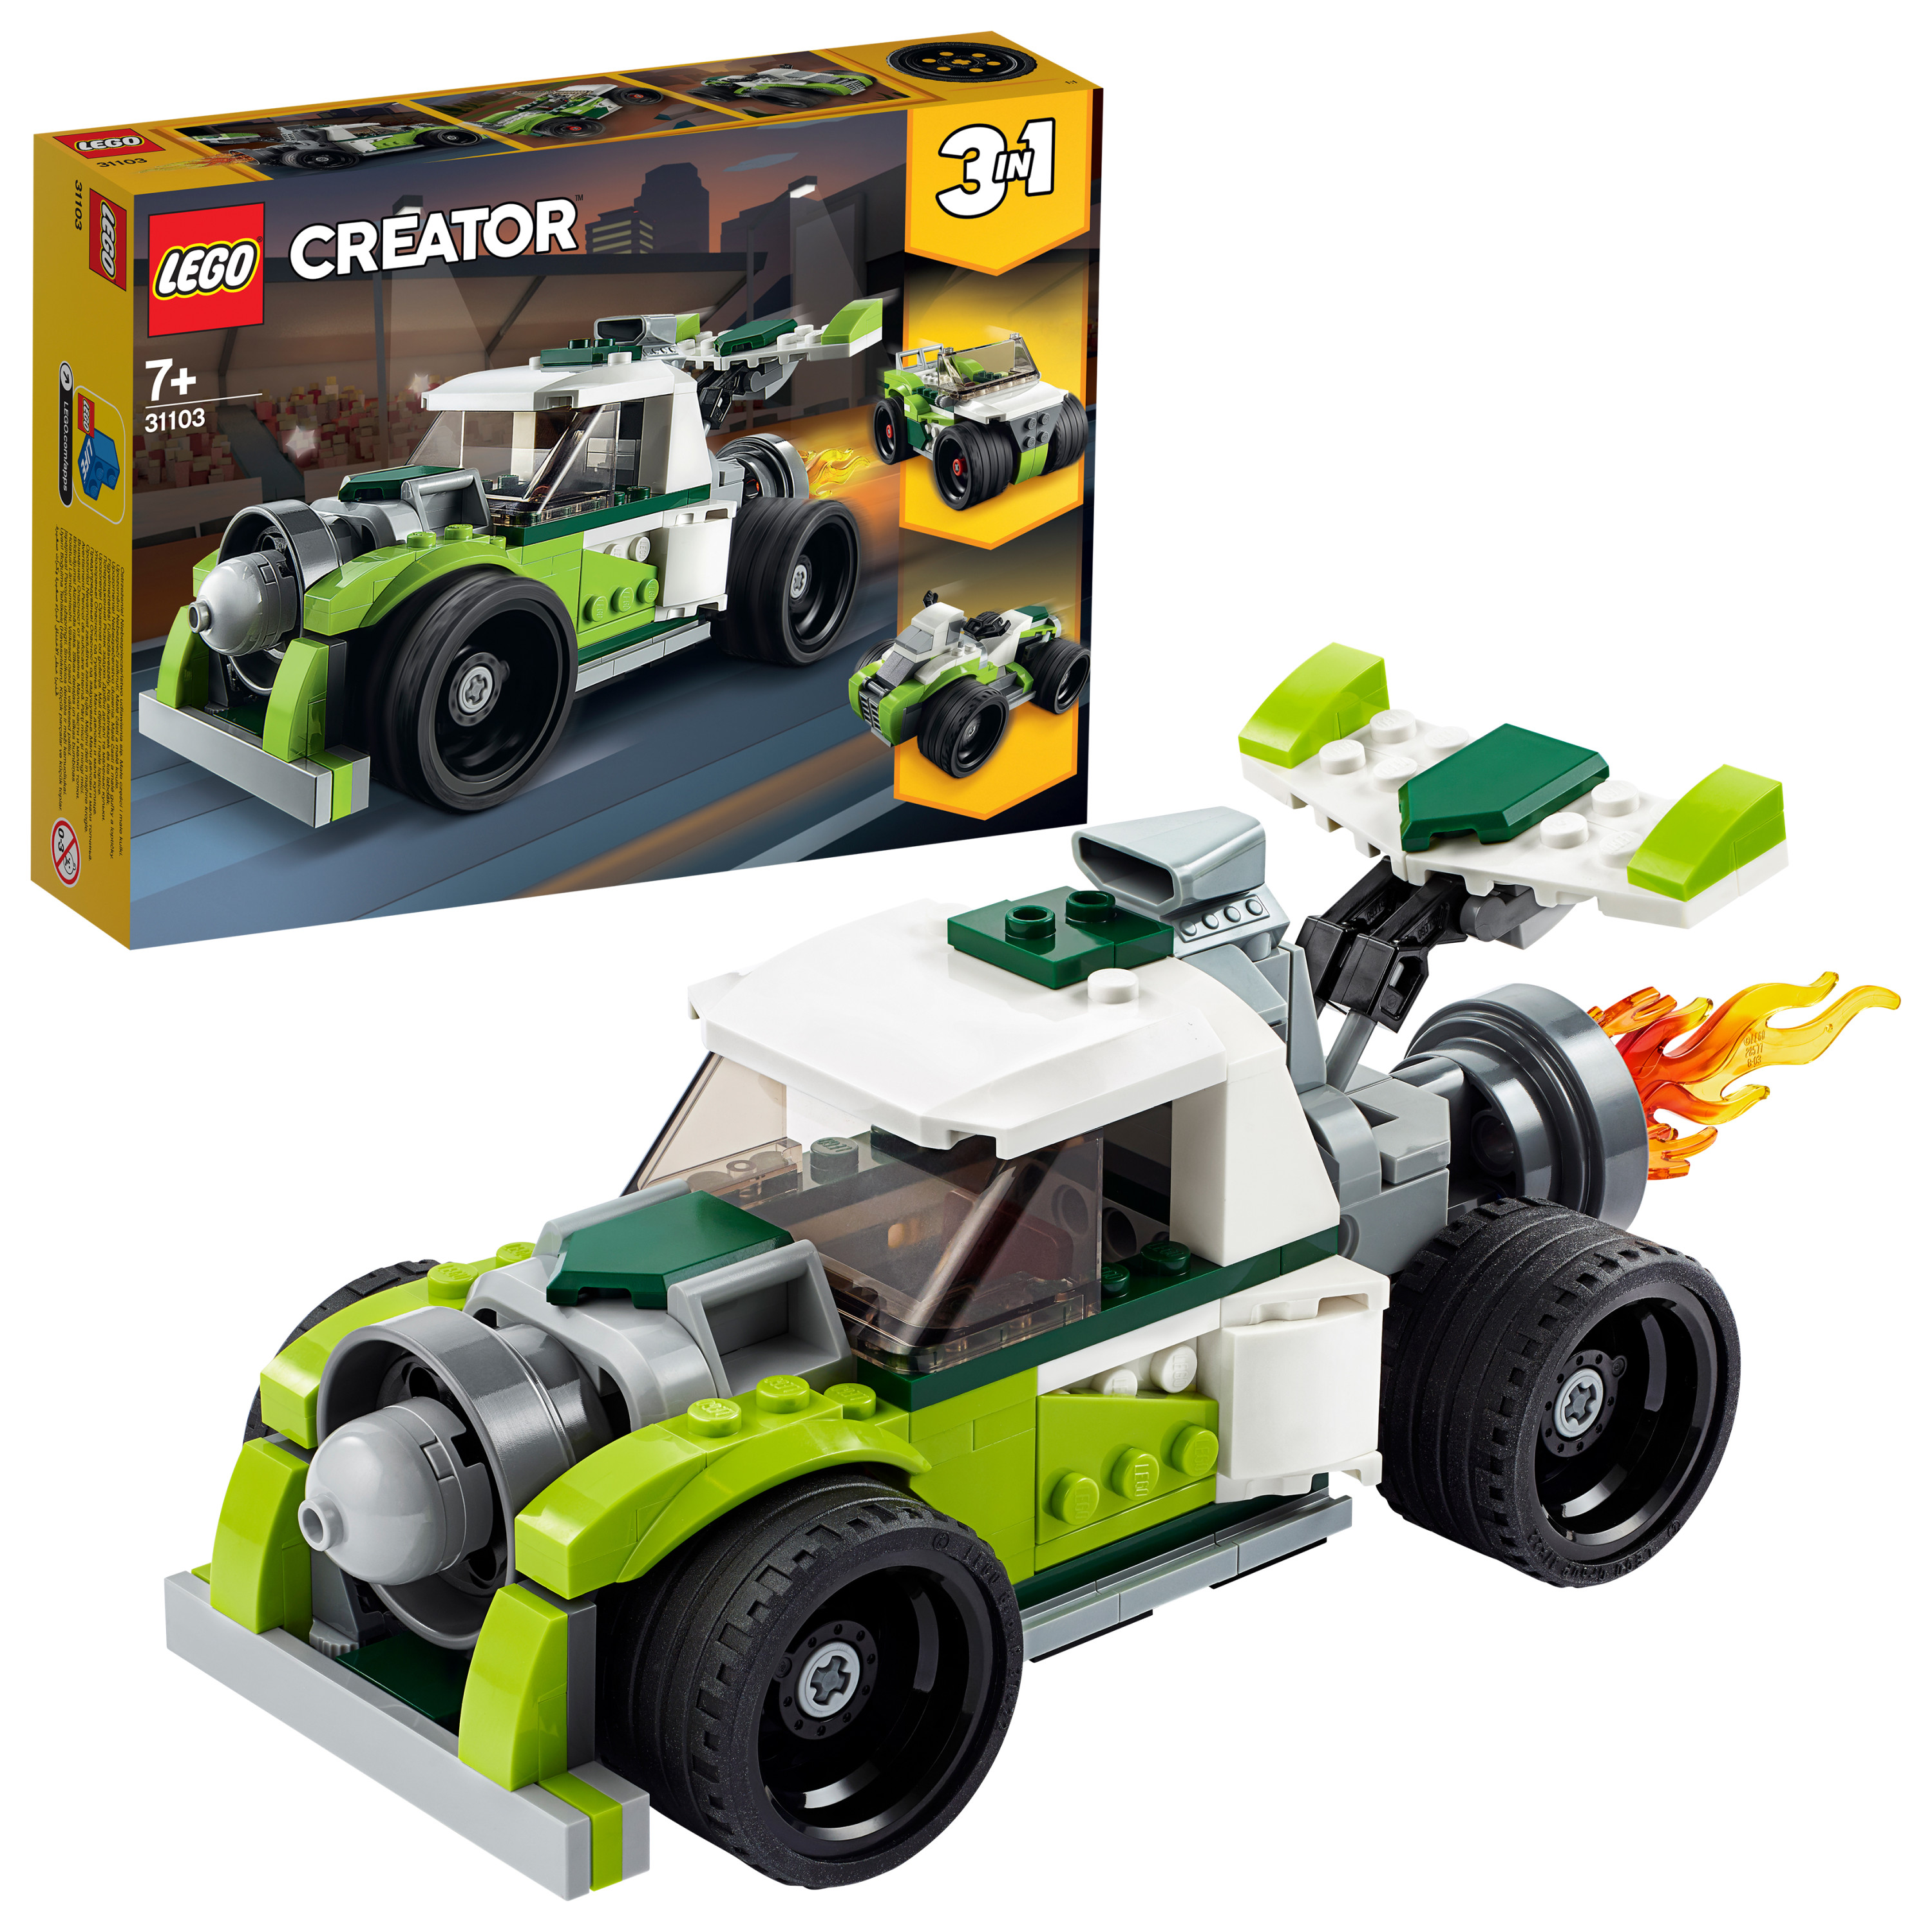 LEGO Creator 3in1 Rocket Truck 31103 Action Building Toy for Kids, Build a Rocket Truck, Off-Roader or Quad Bike (198 Pieces) - image 1 of 6